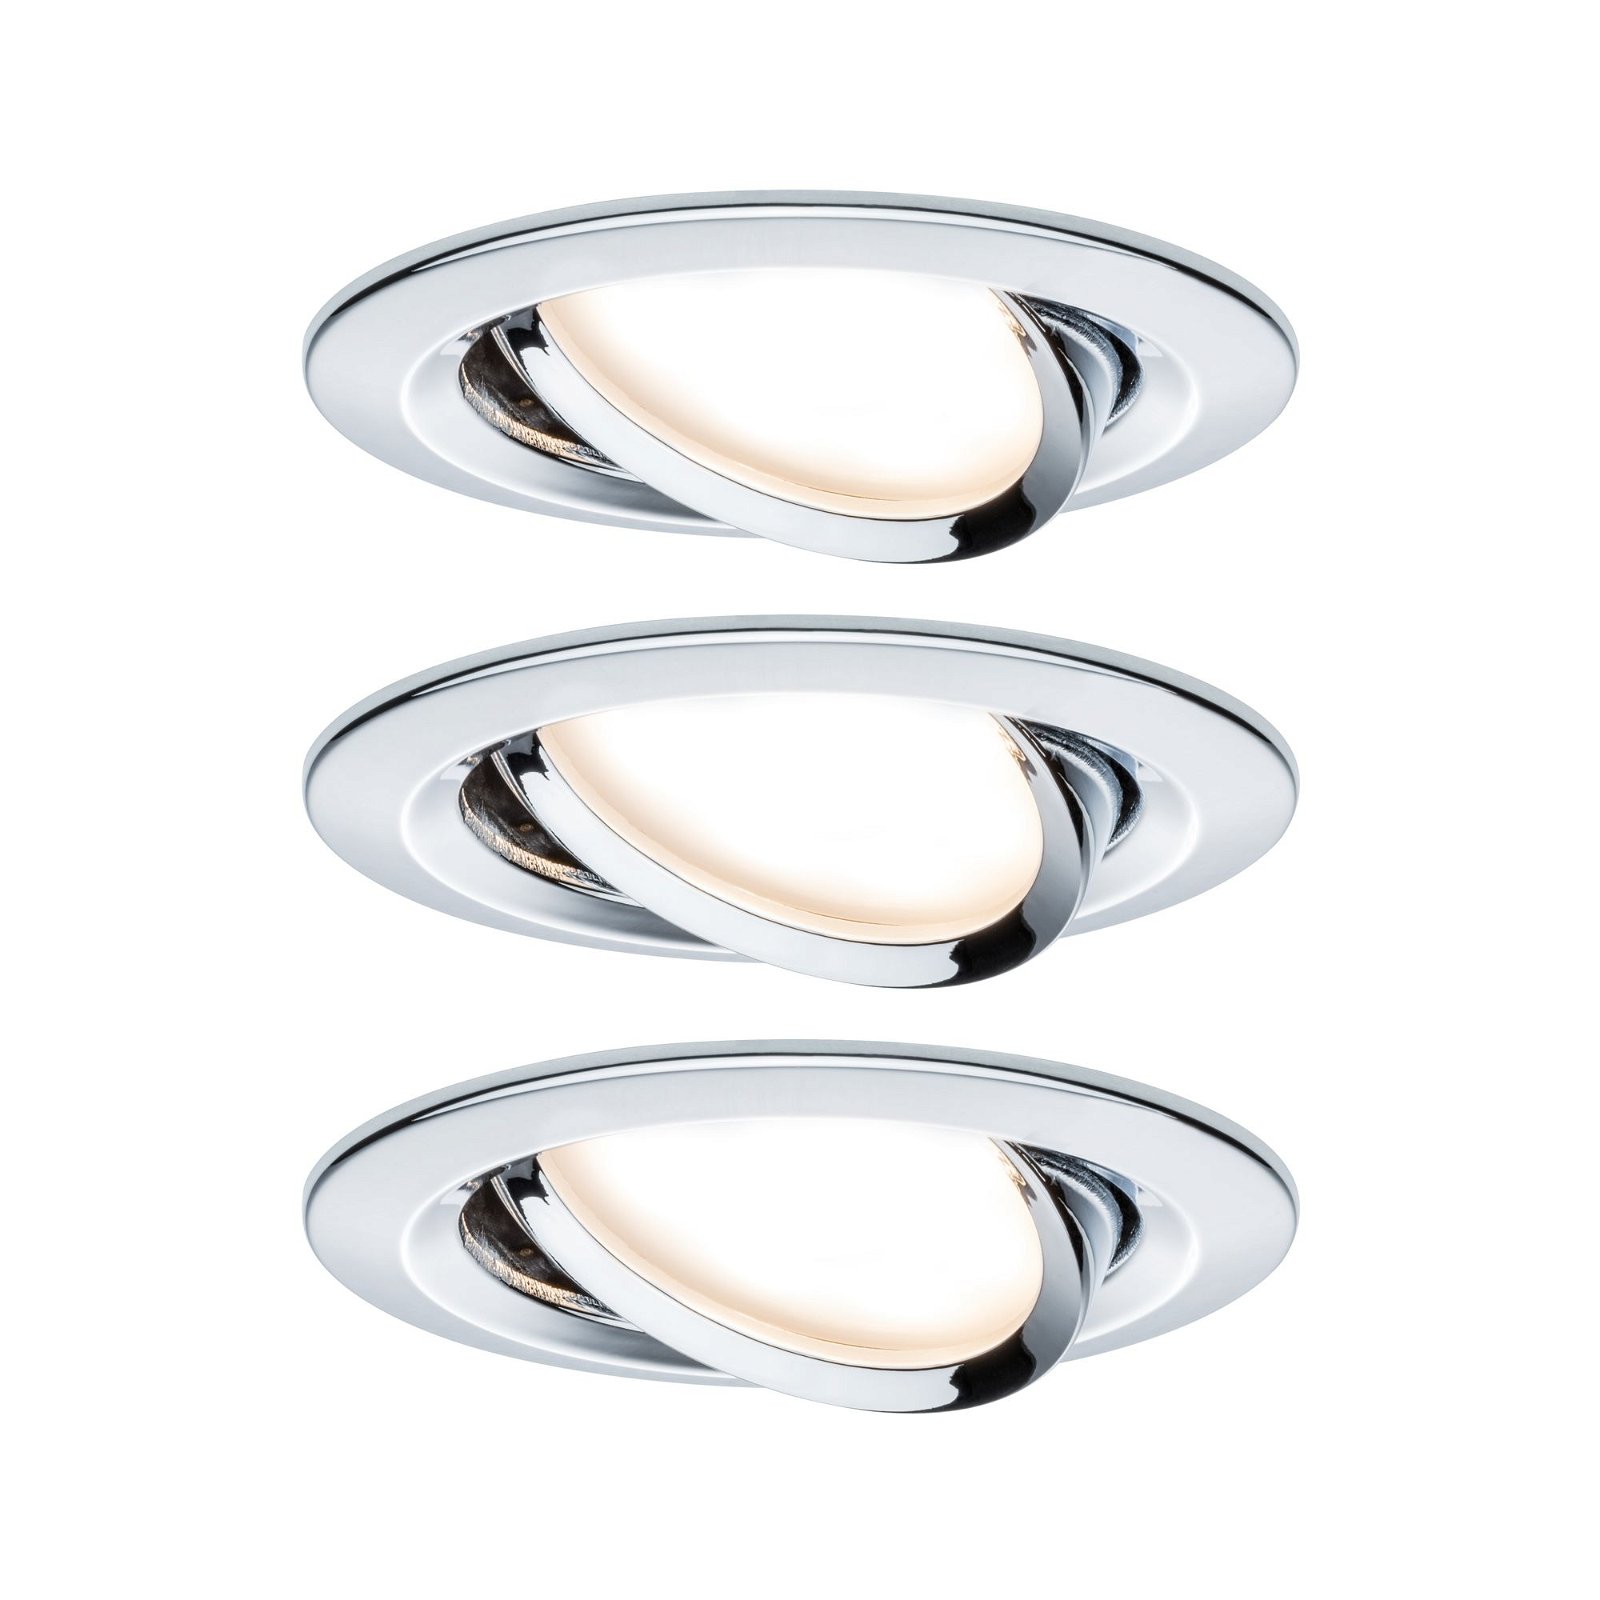 LED Recessed luminaire Nova Plus Coin Basic Set Swivelling round 84mm 50° Coin 3x6W 3x470lm 230V dimmable 2700K Chrome